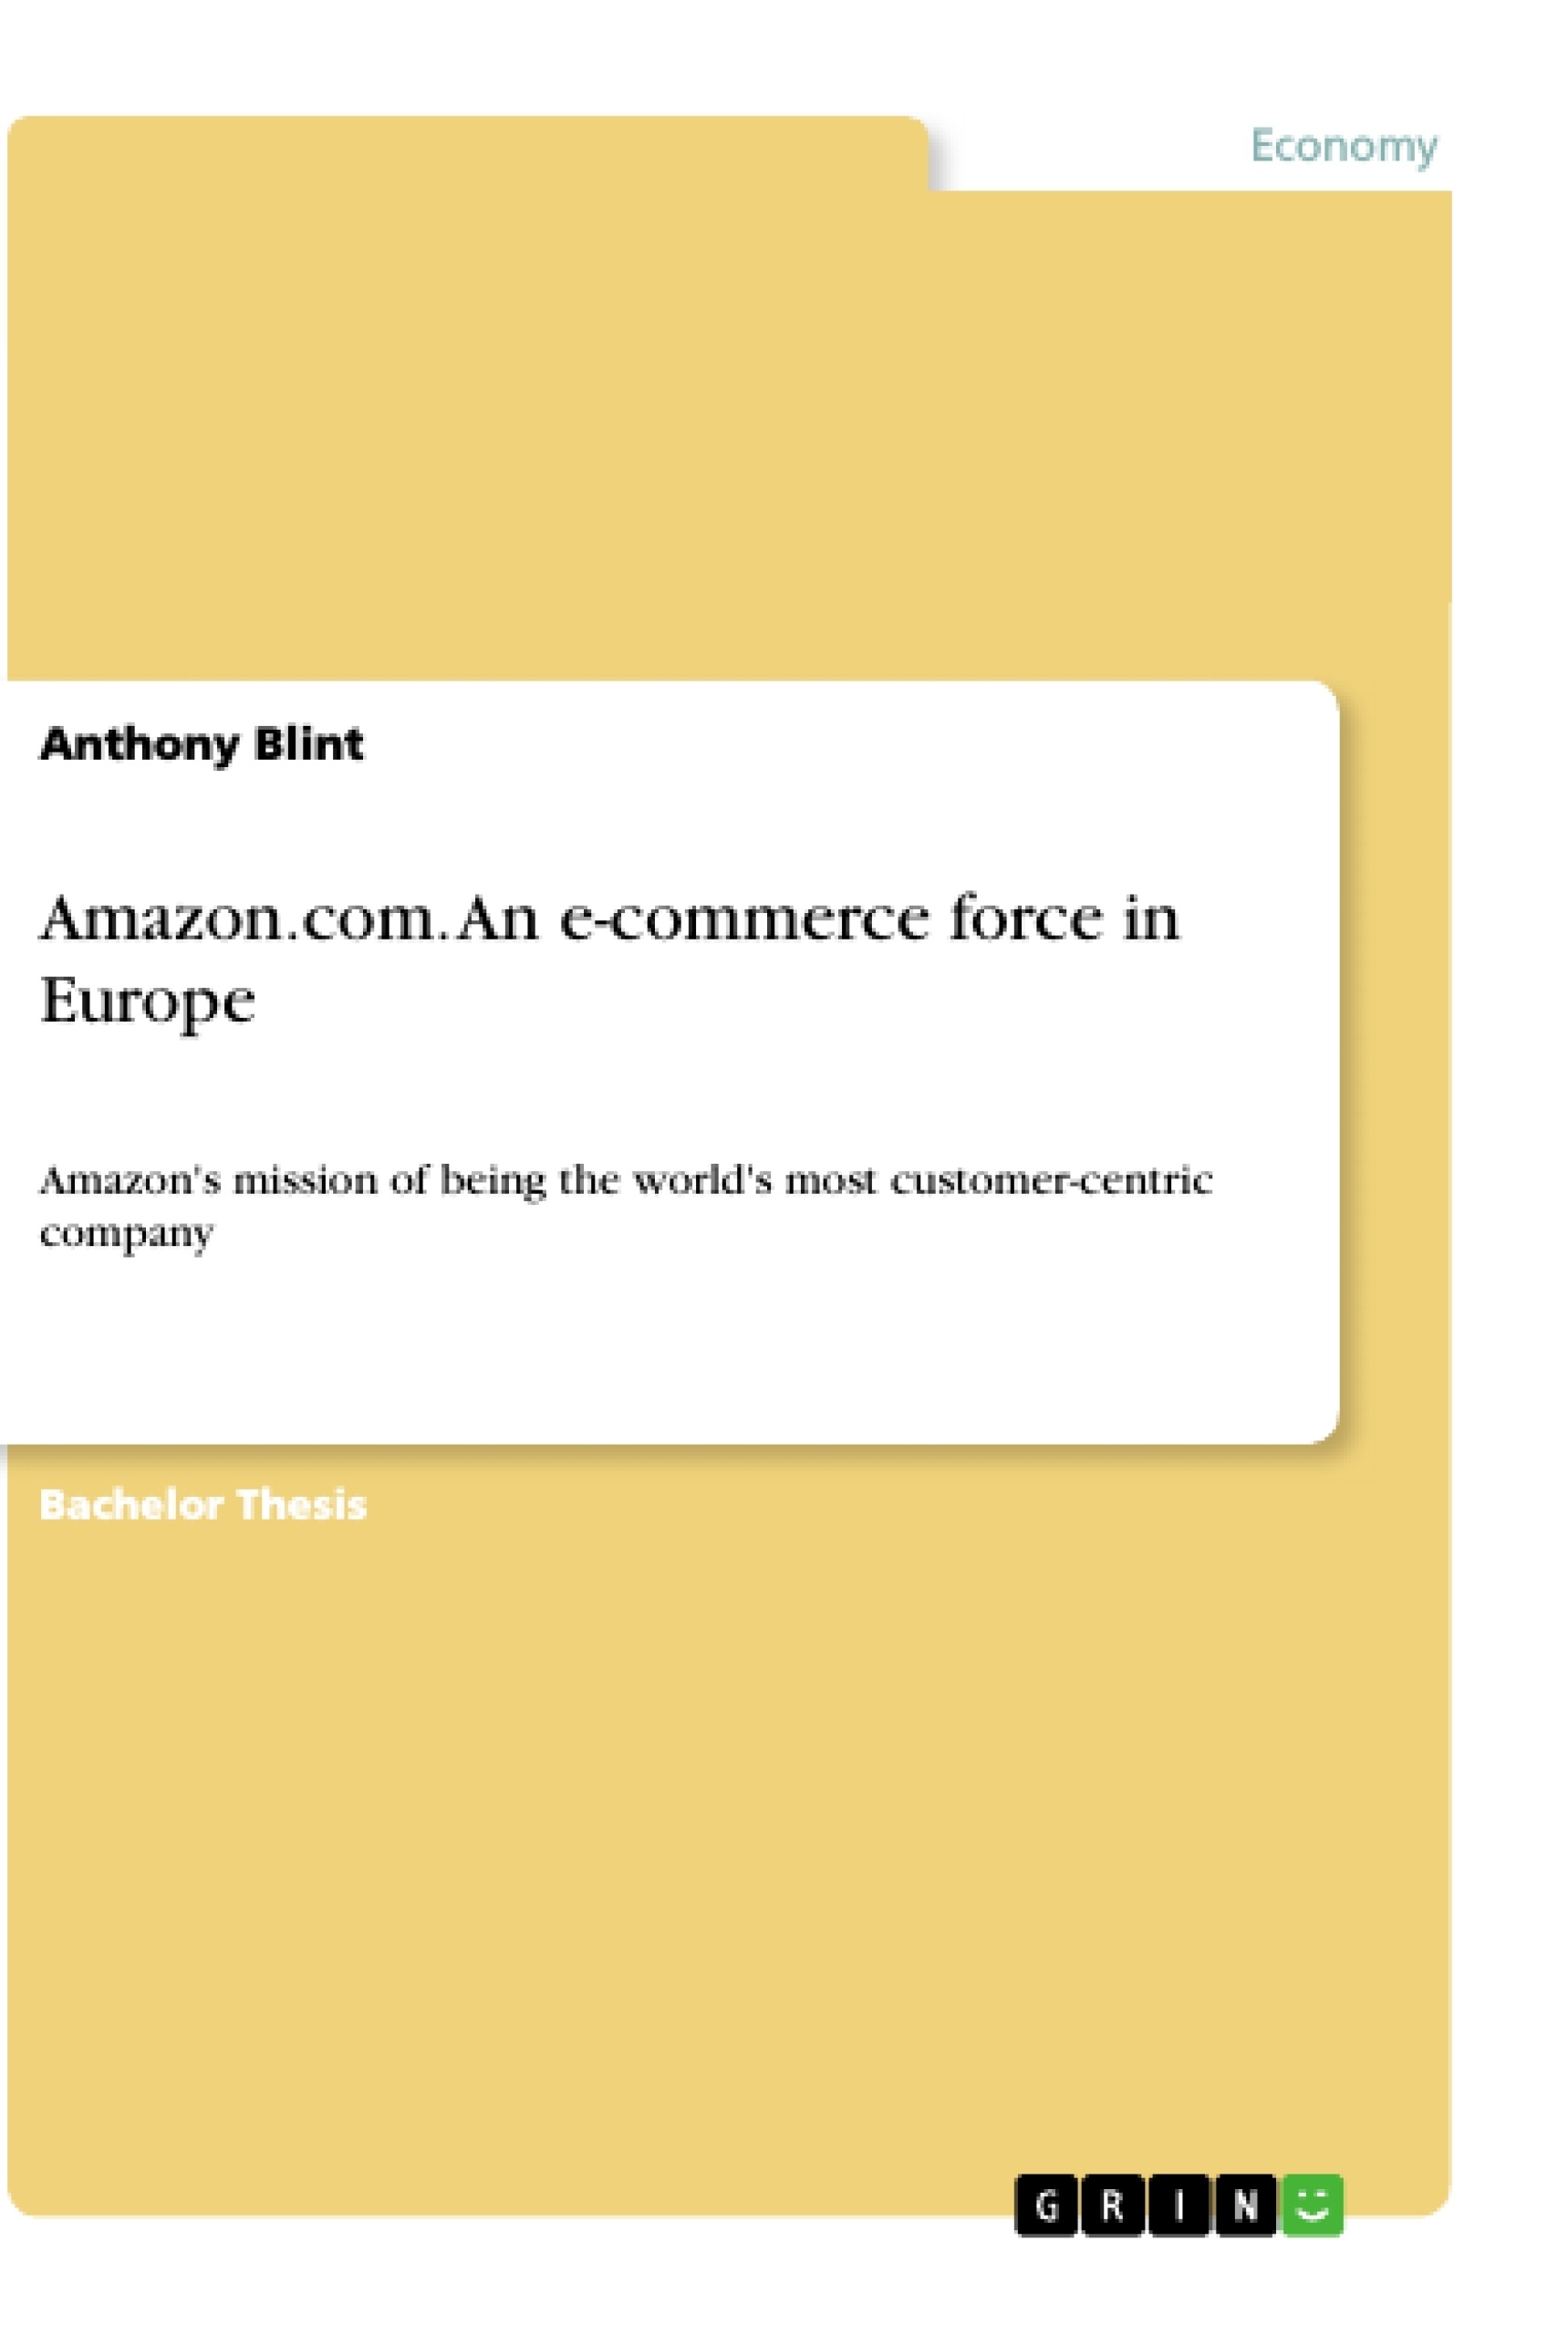 Title: Amazon.com. An e-commerce force in Europe